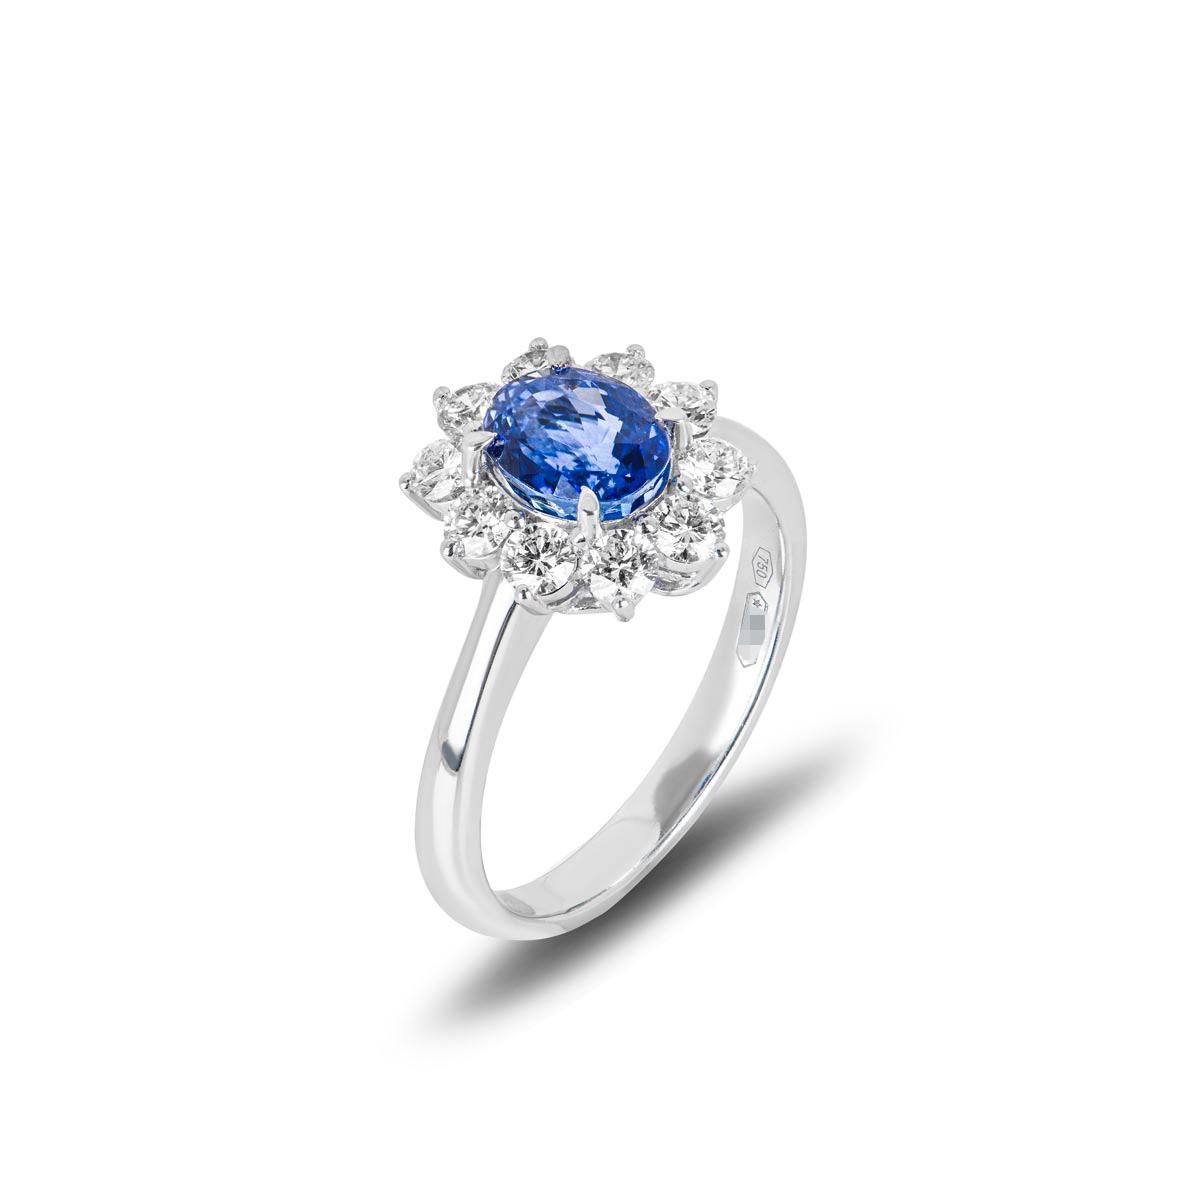 A remarkable 18k white gold sapphire and diamond ring. The ring features a 1.67ct oval cut sapphire set to the centre with a velvety blue hue. Accentuating the sapphire is a halo of 10 round brilliant cut diamonds with an approximate weight of